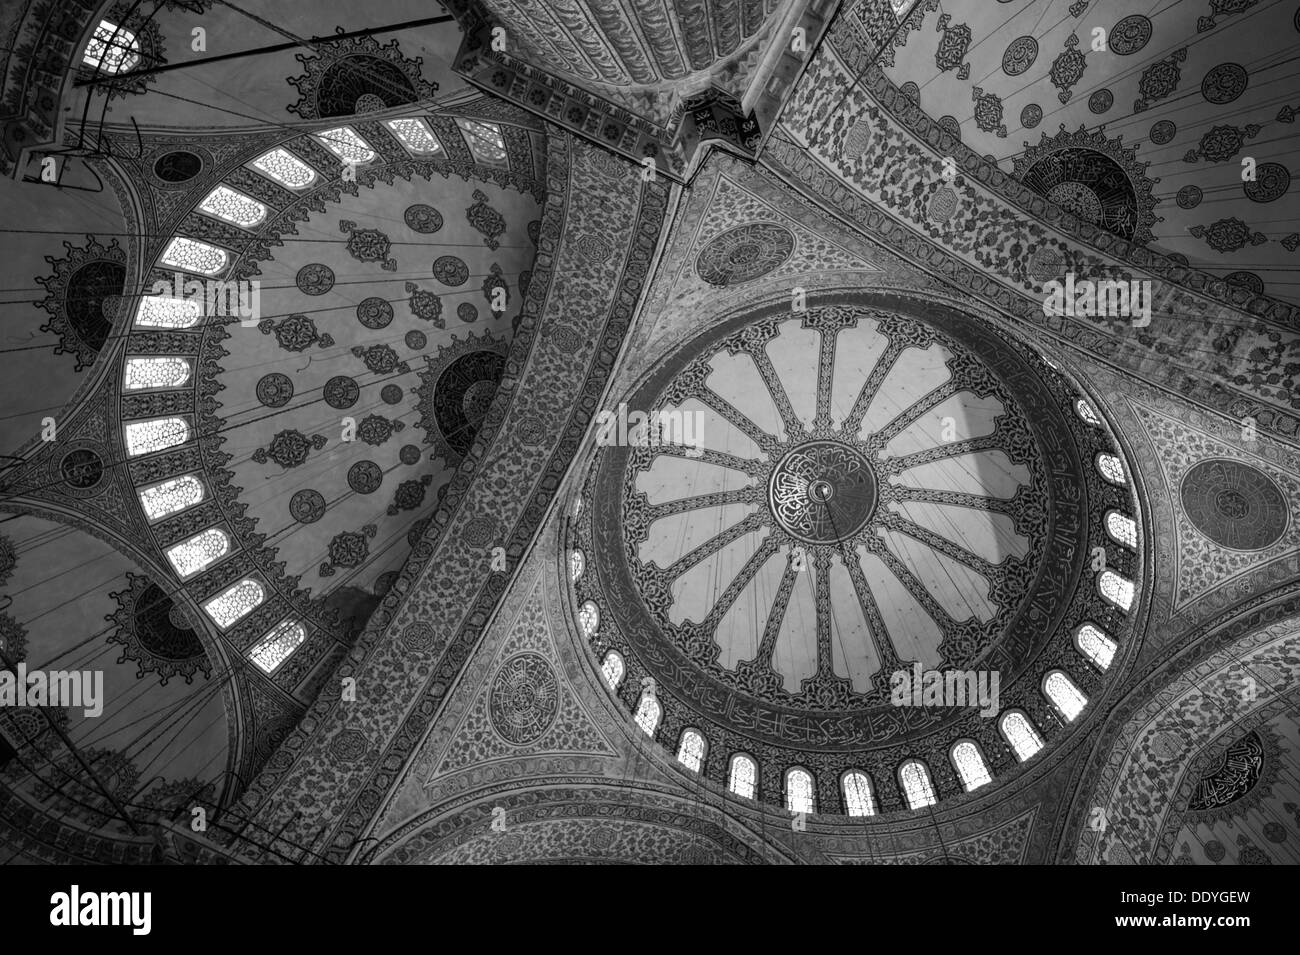 The ceiling of the Sultanahmet Mosque (Blue Mosque) Istanbul Stock Photo